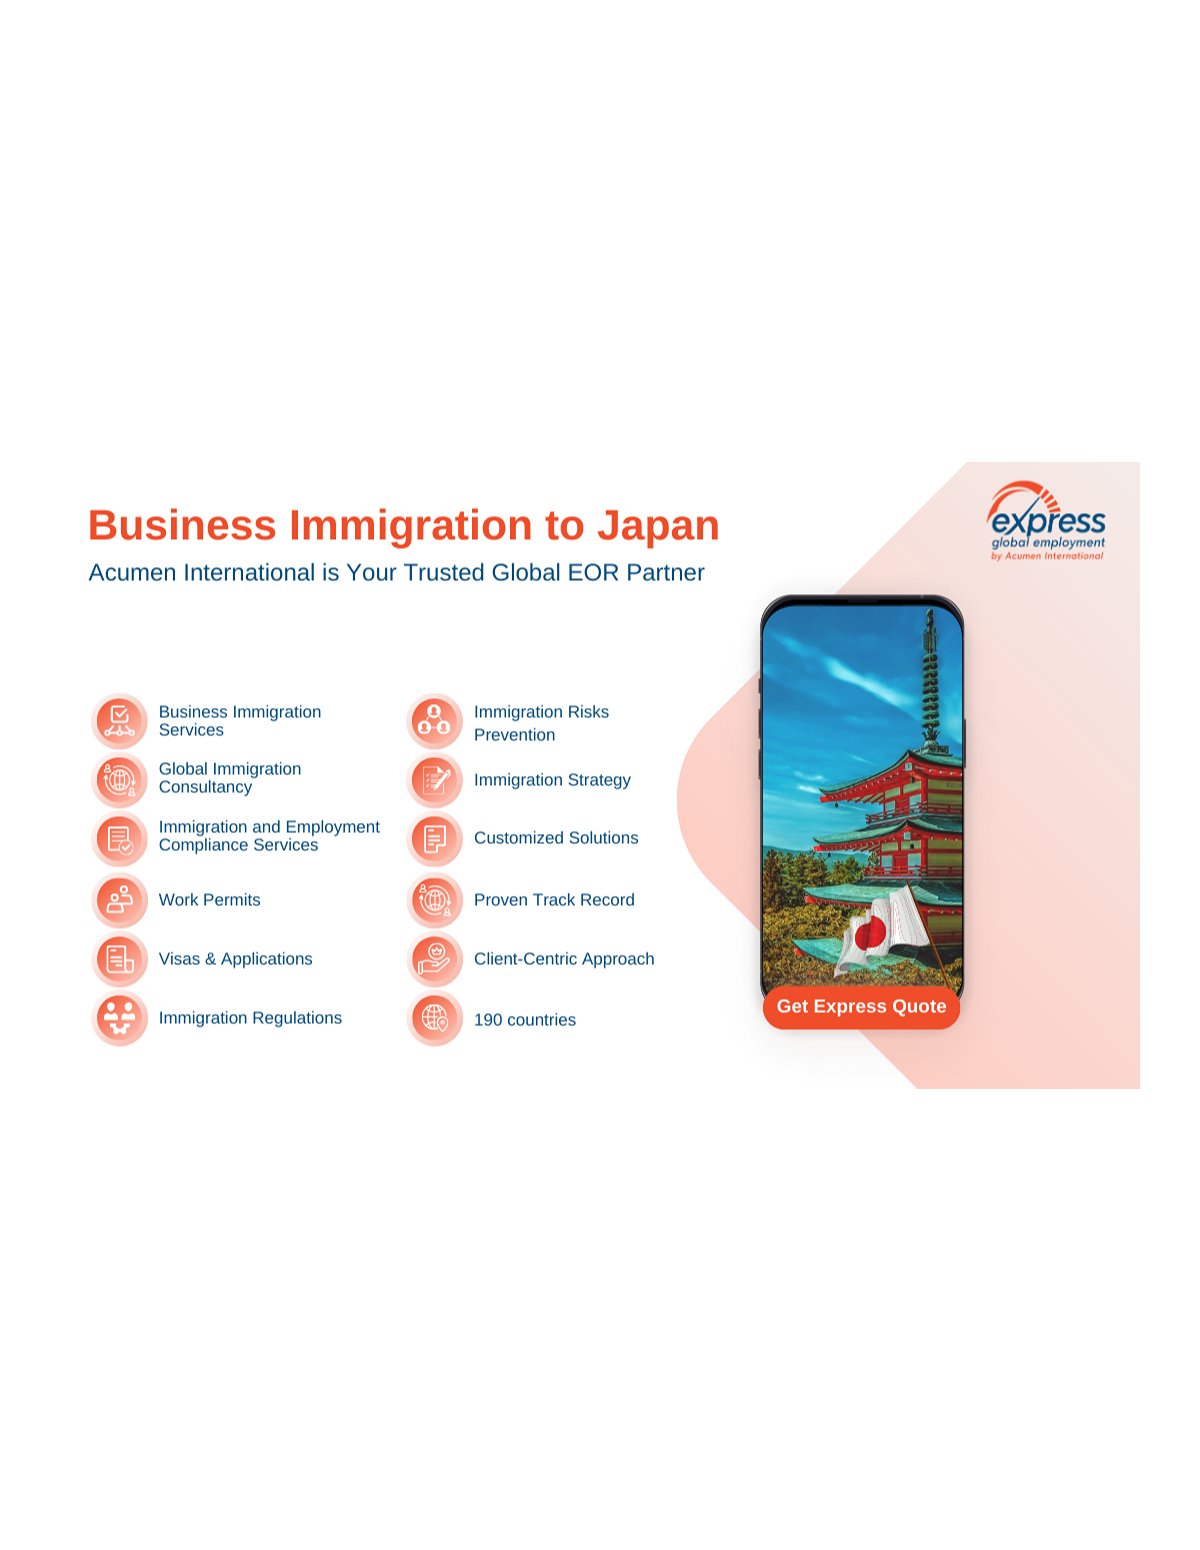 Expand into Japan: Complete Work Permit and Immigration support